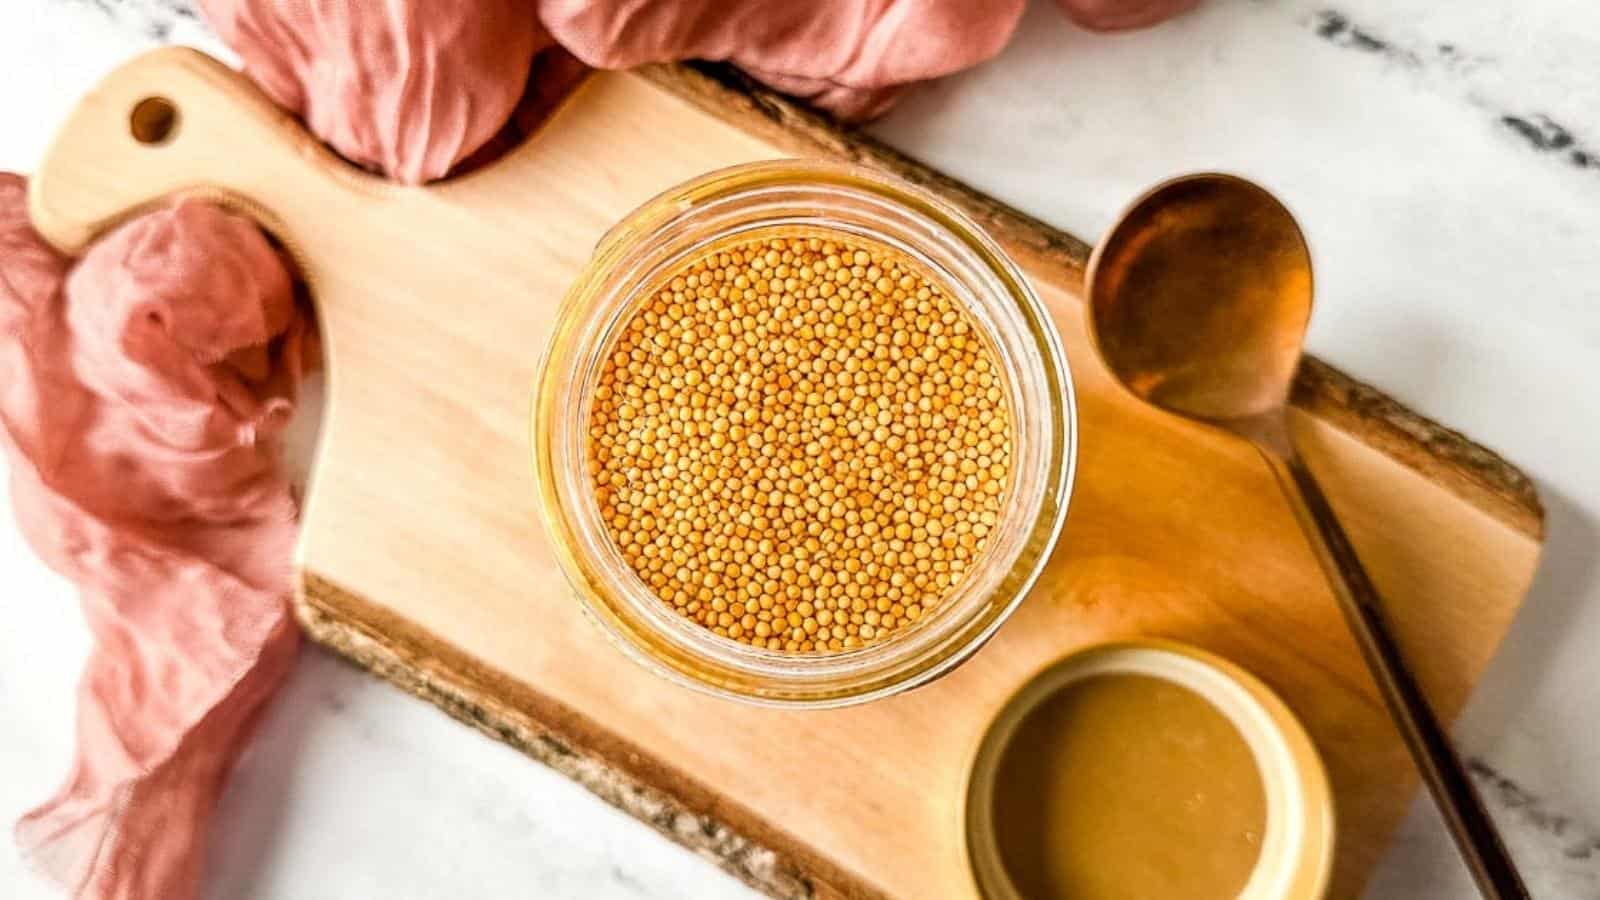 Pickled mustard seeds in a glass jar on a rustic wooden cutting board.